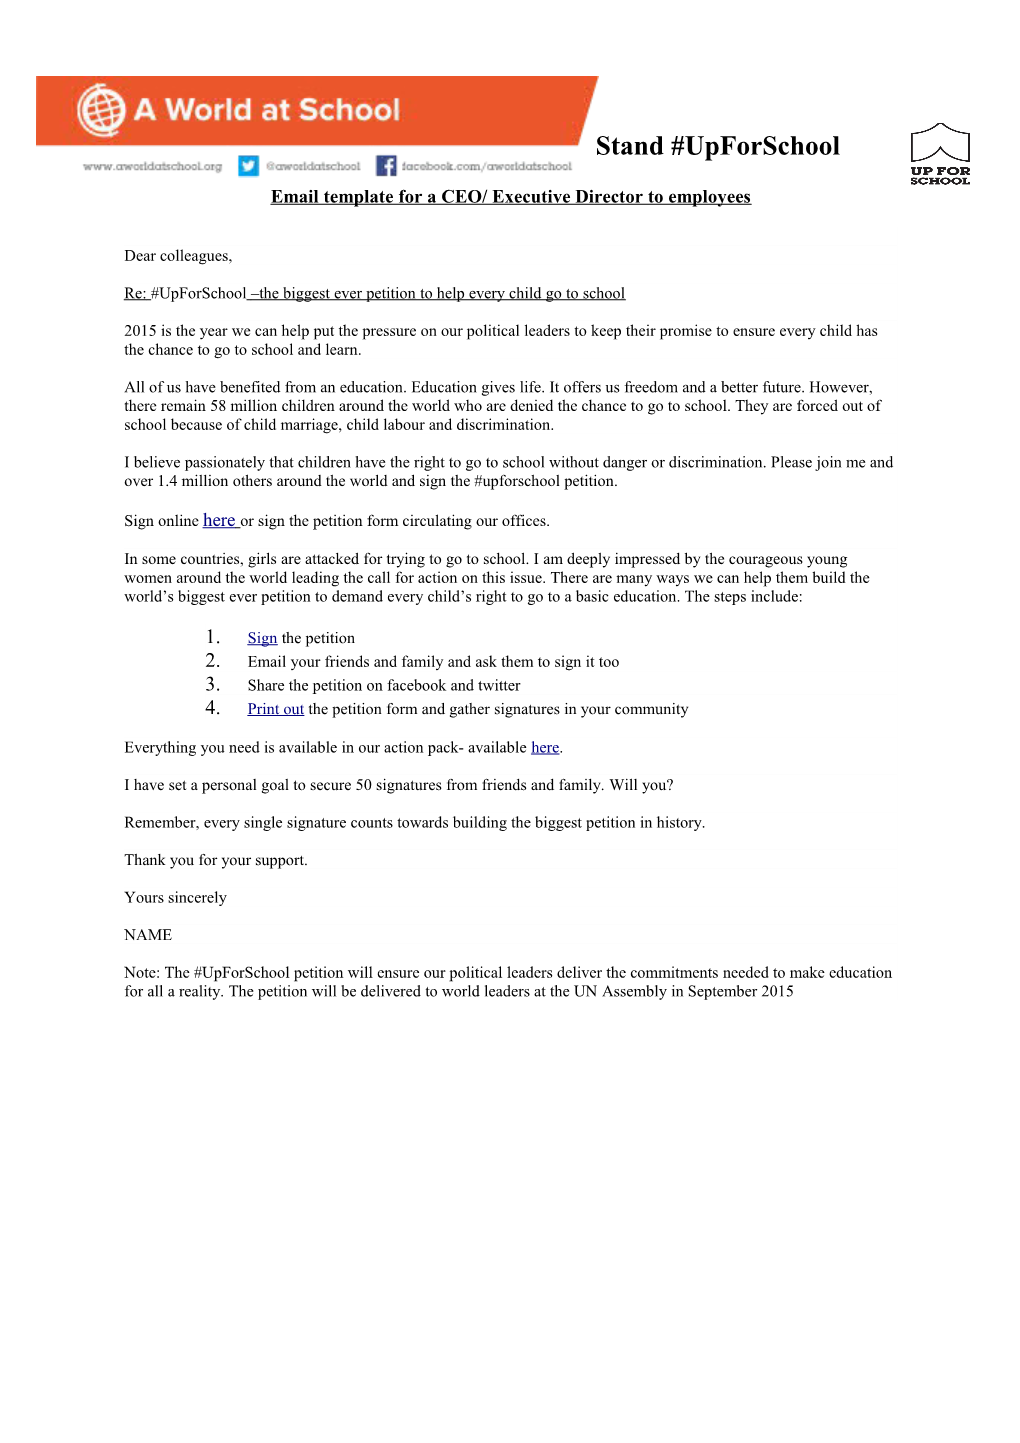 Email Template for a CEO/ Executive Director to Employees